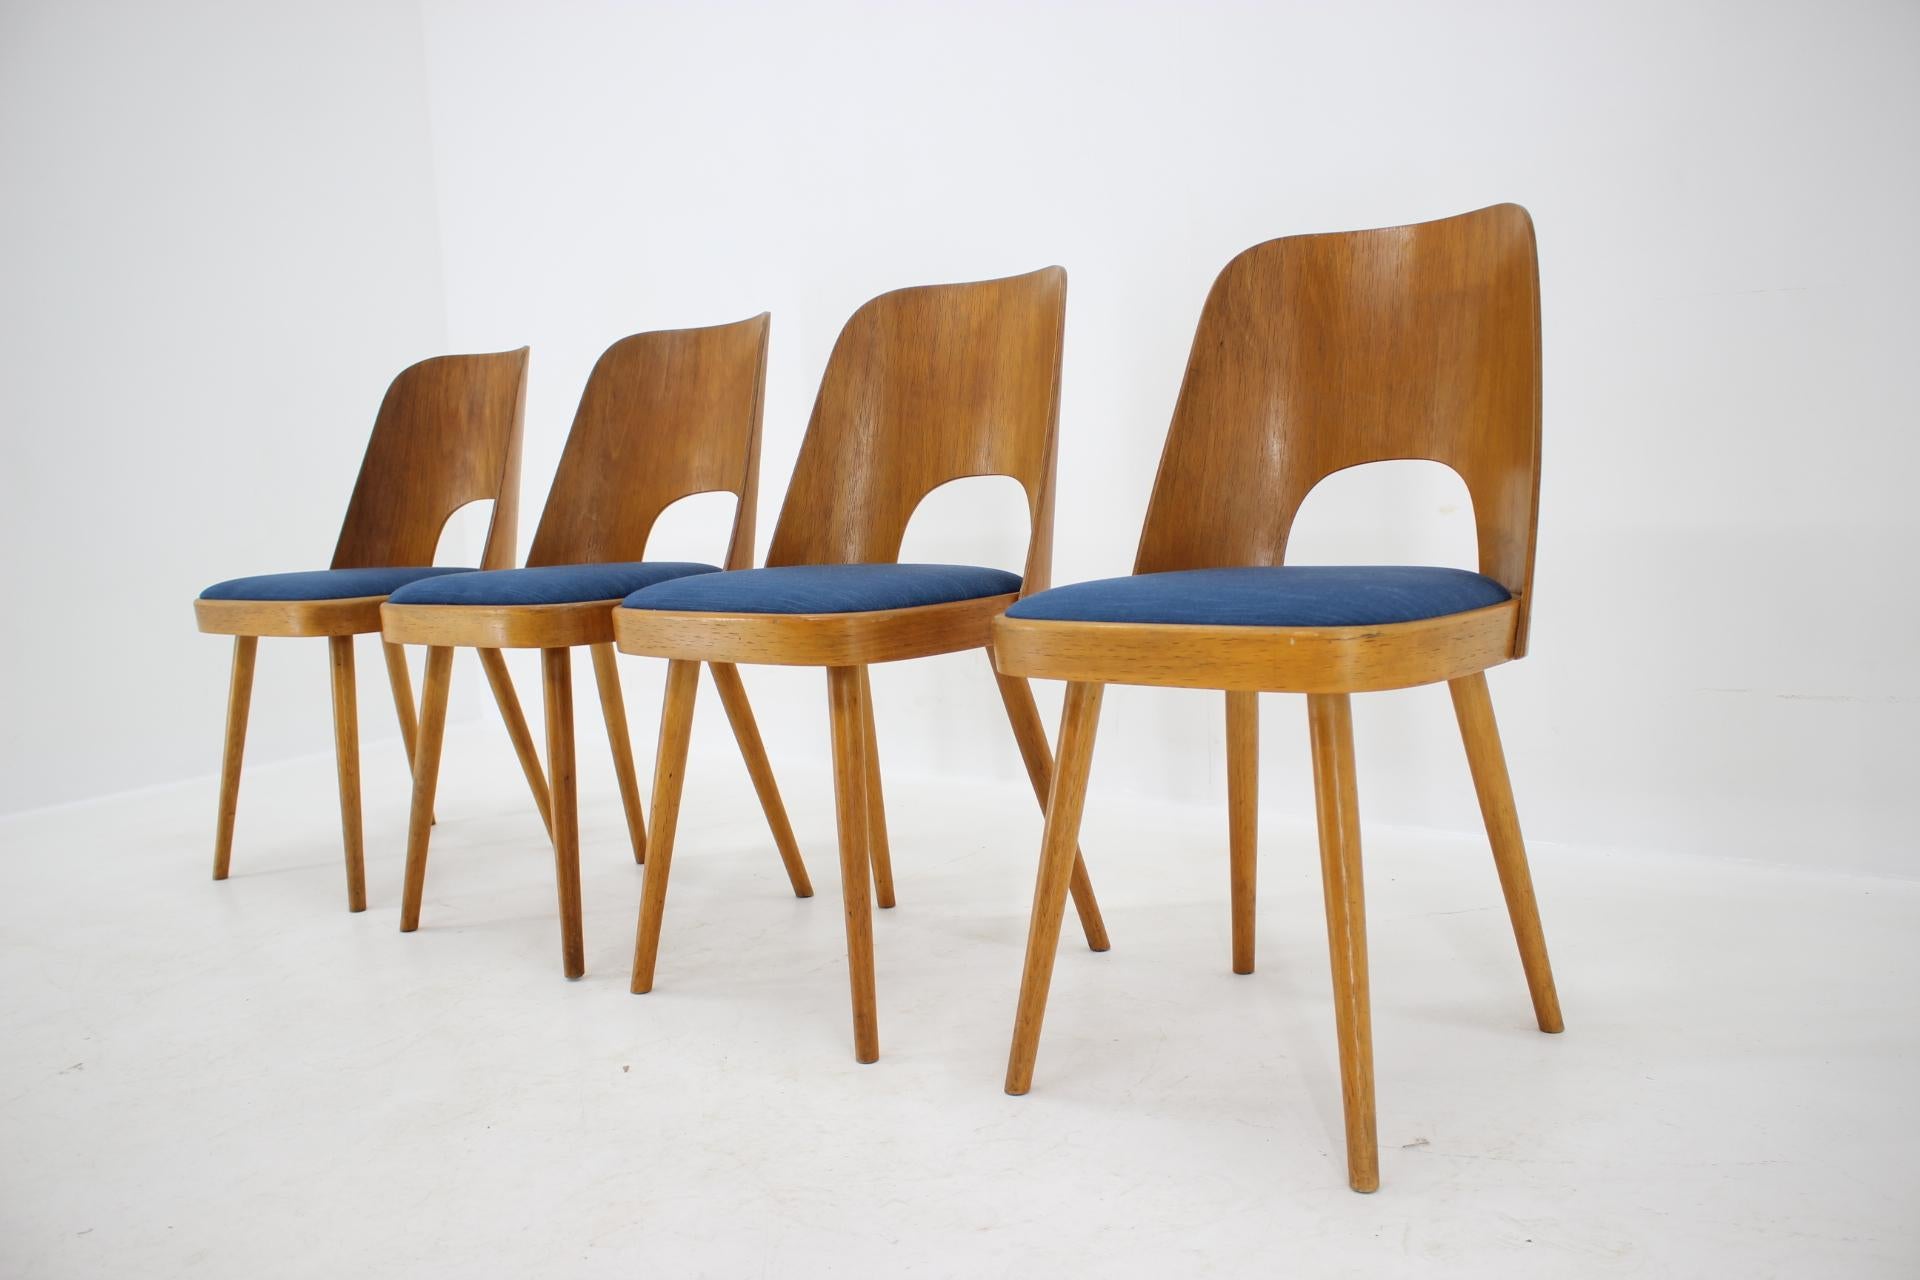 - Czechoslovakia, 1960s
- Design: Oswald Haerdtl
- All renovated, new upholstery
- Labeled by manufacturer.